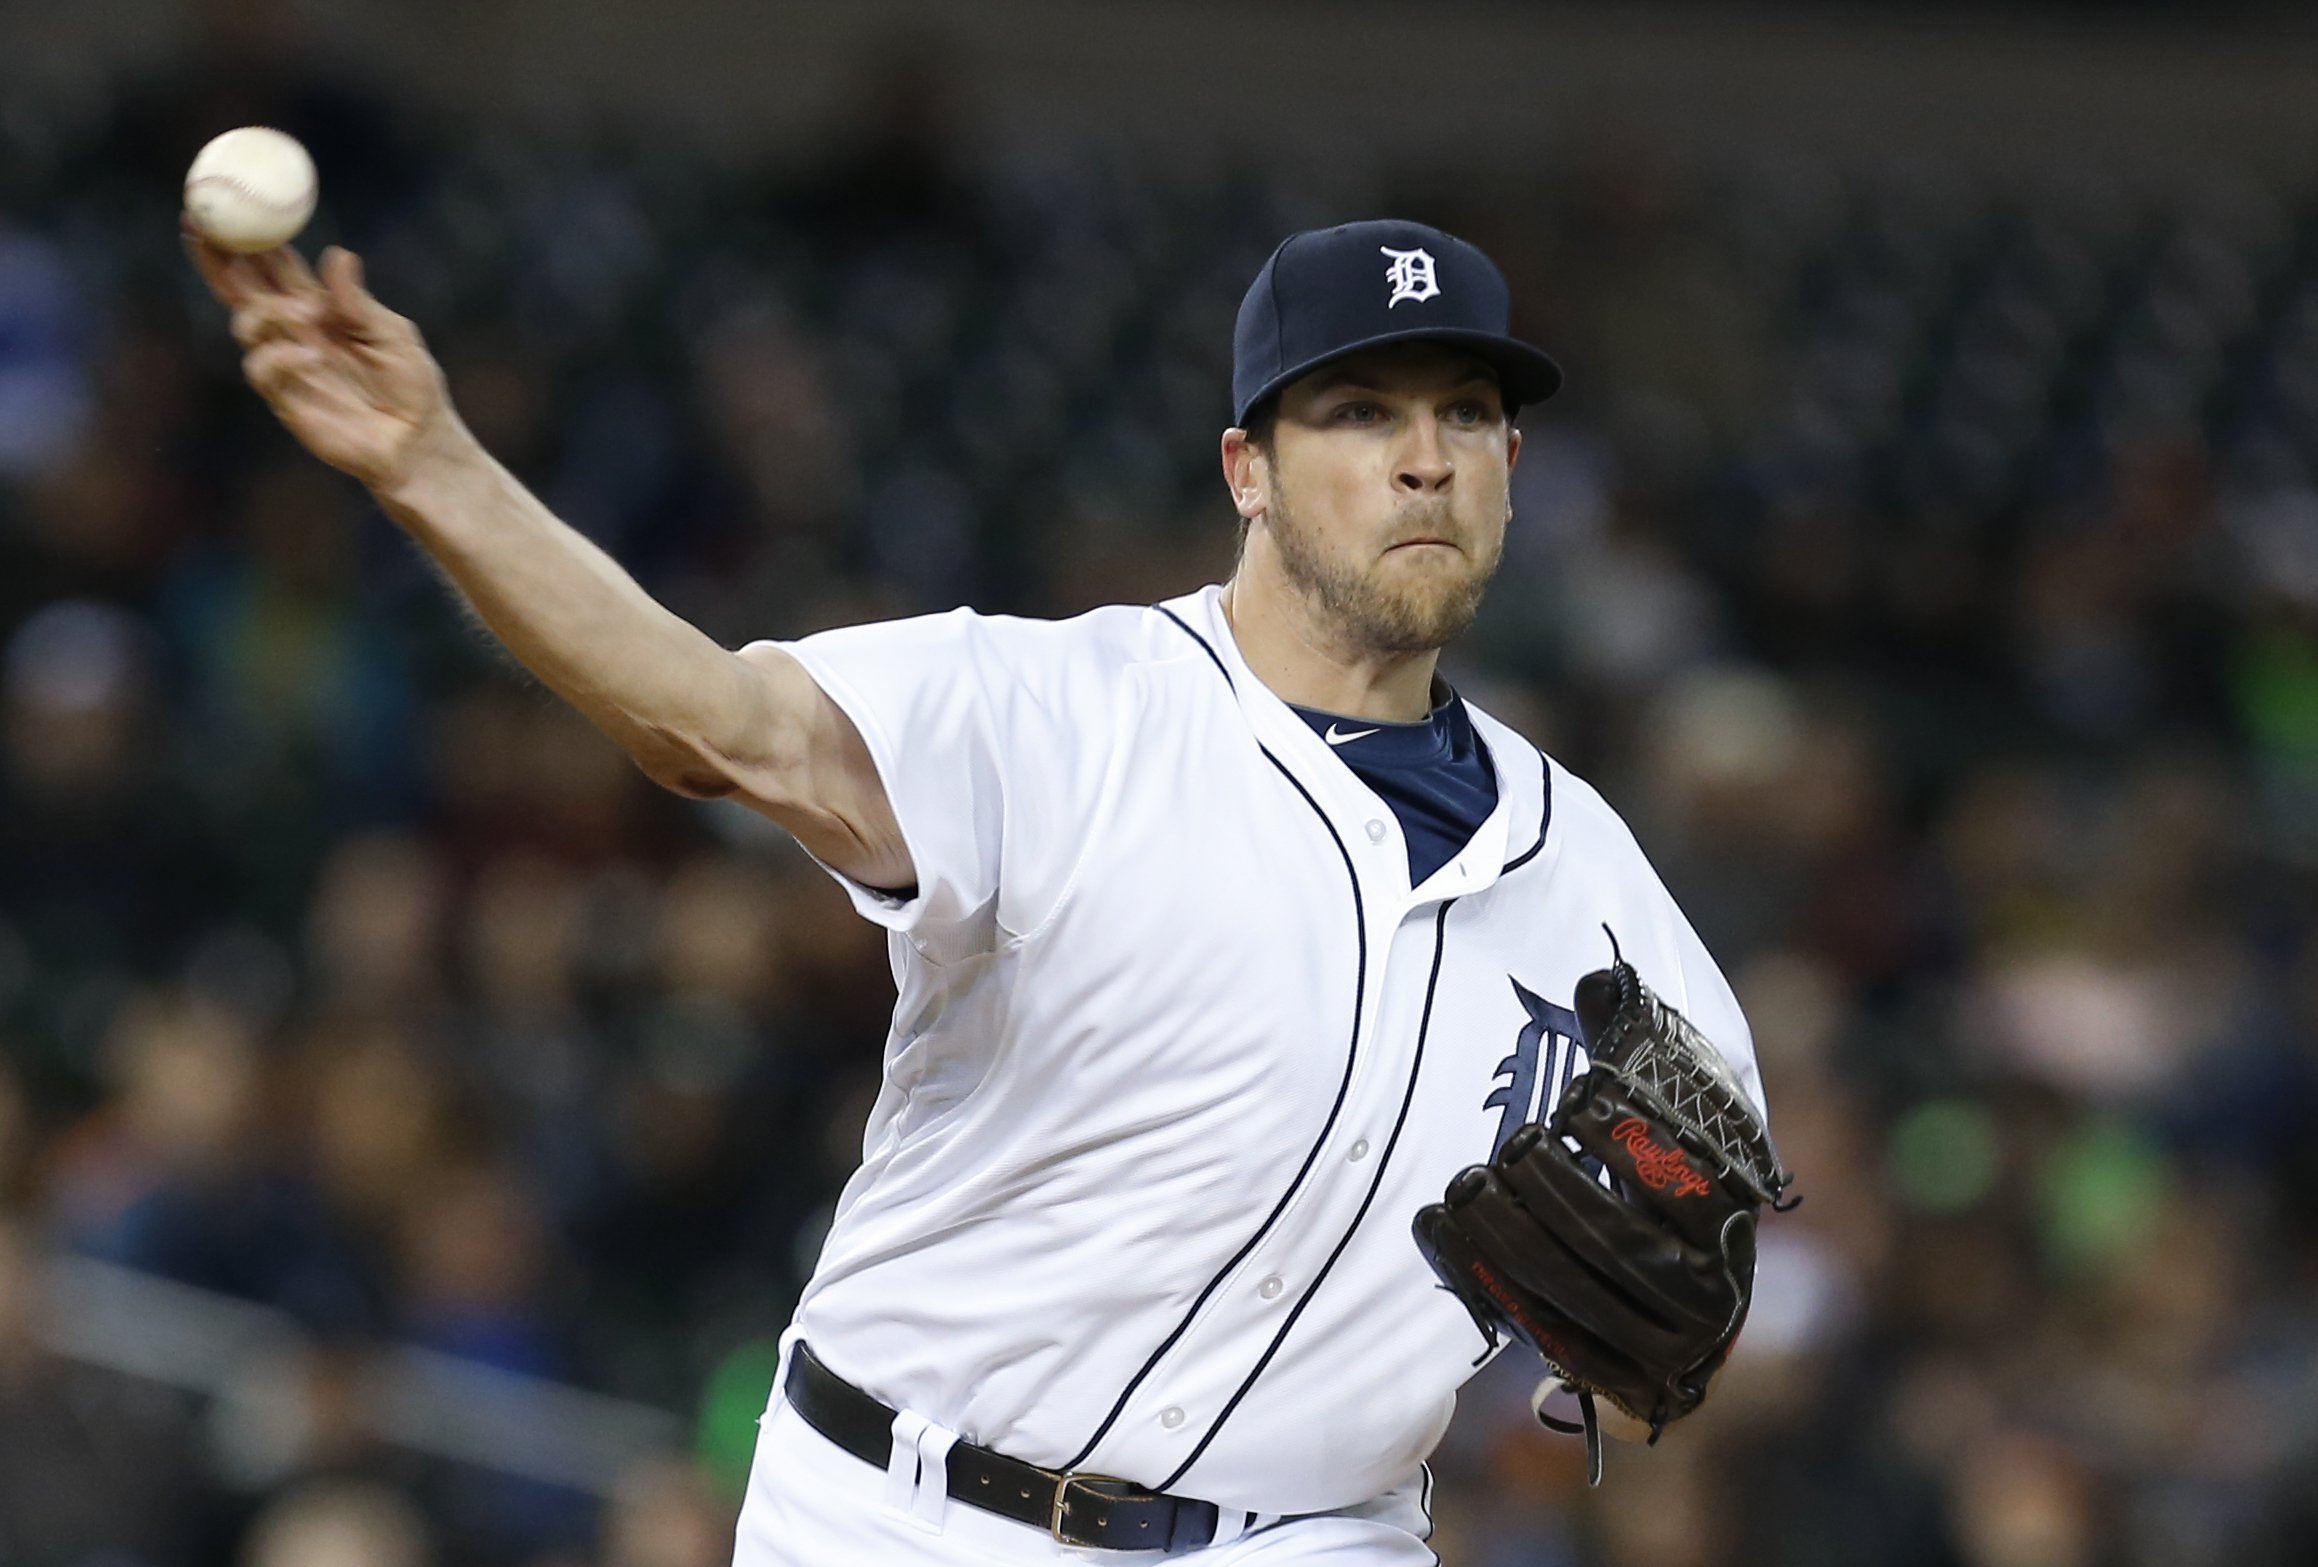 Detroit Tigers pitcher Evan Reed throws against the Houston Astros in the seventh inning of a baseball game in Detroit on May 6, 2014.